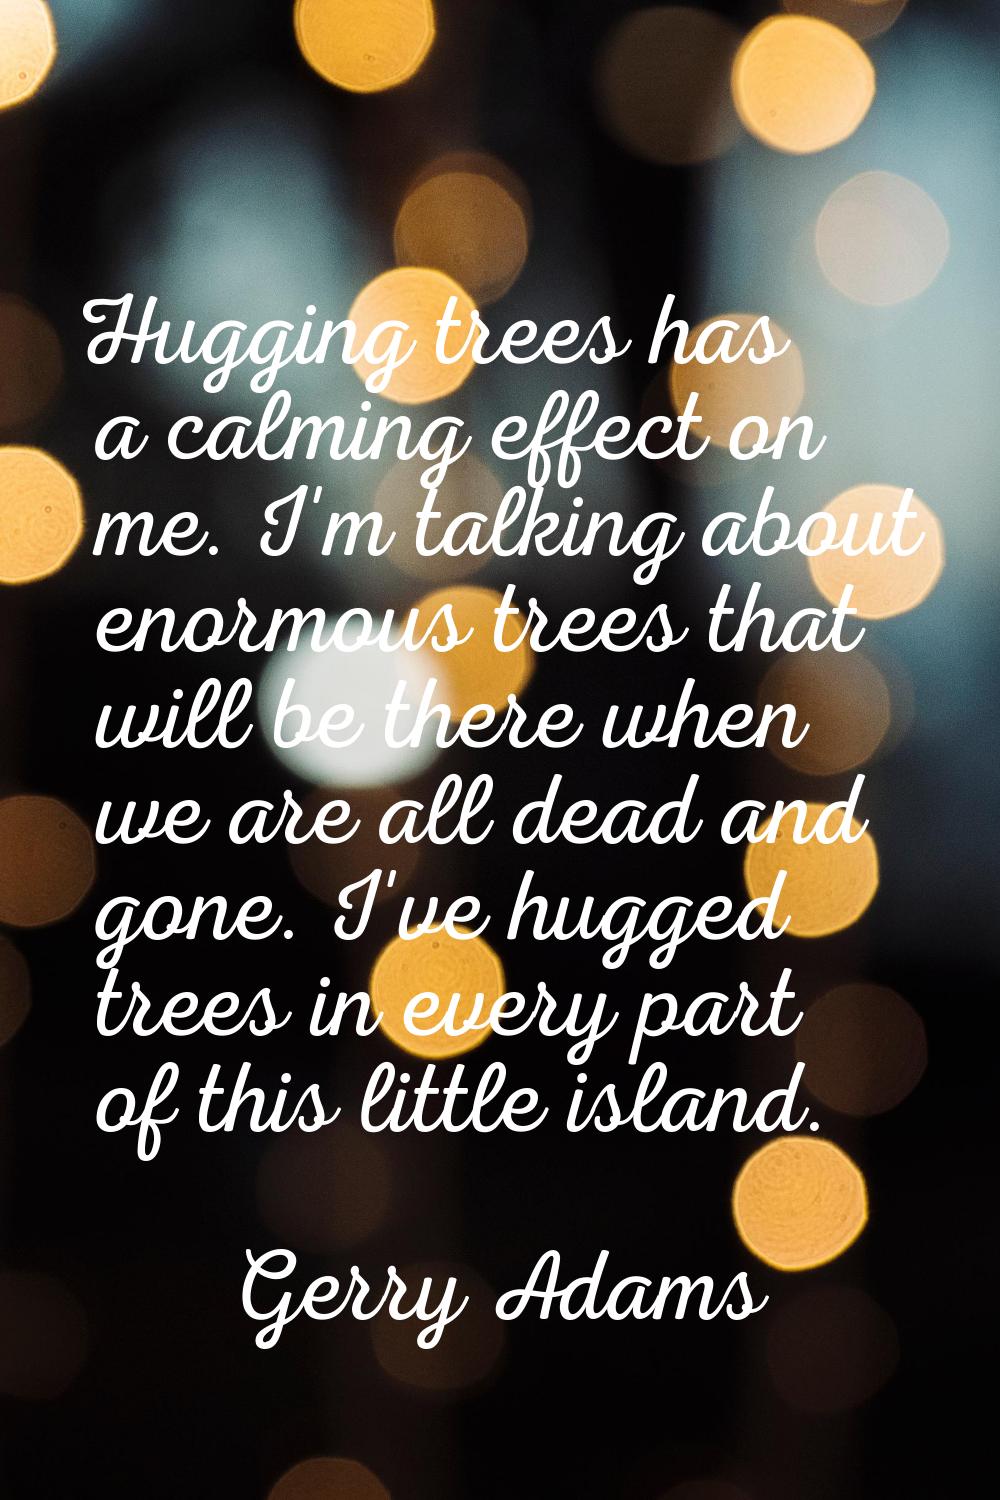 Hugging trees has a calming effect on me. I'm talking about enormous trees that will be there when 